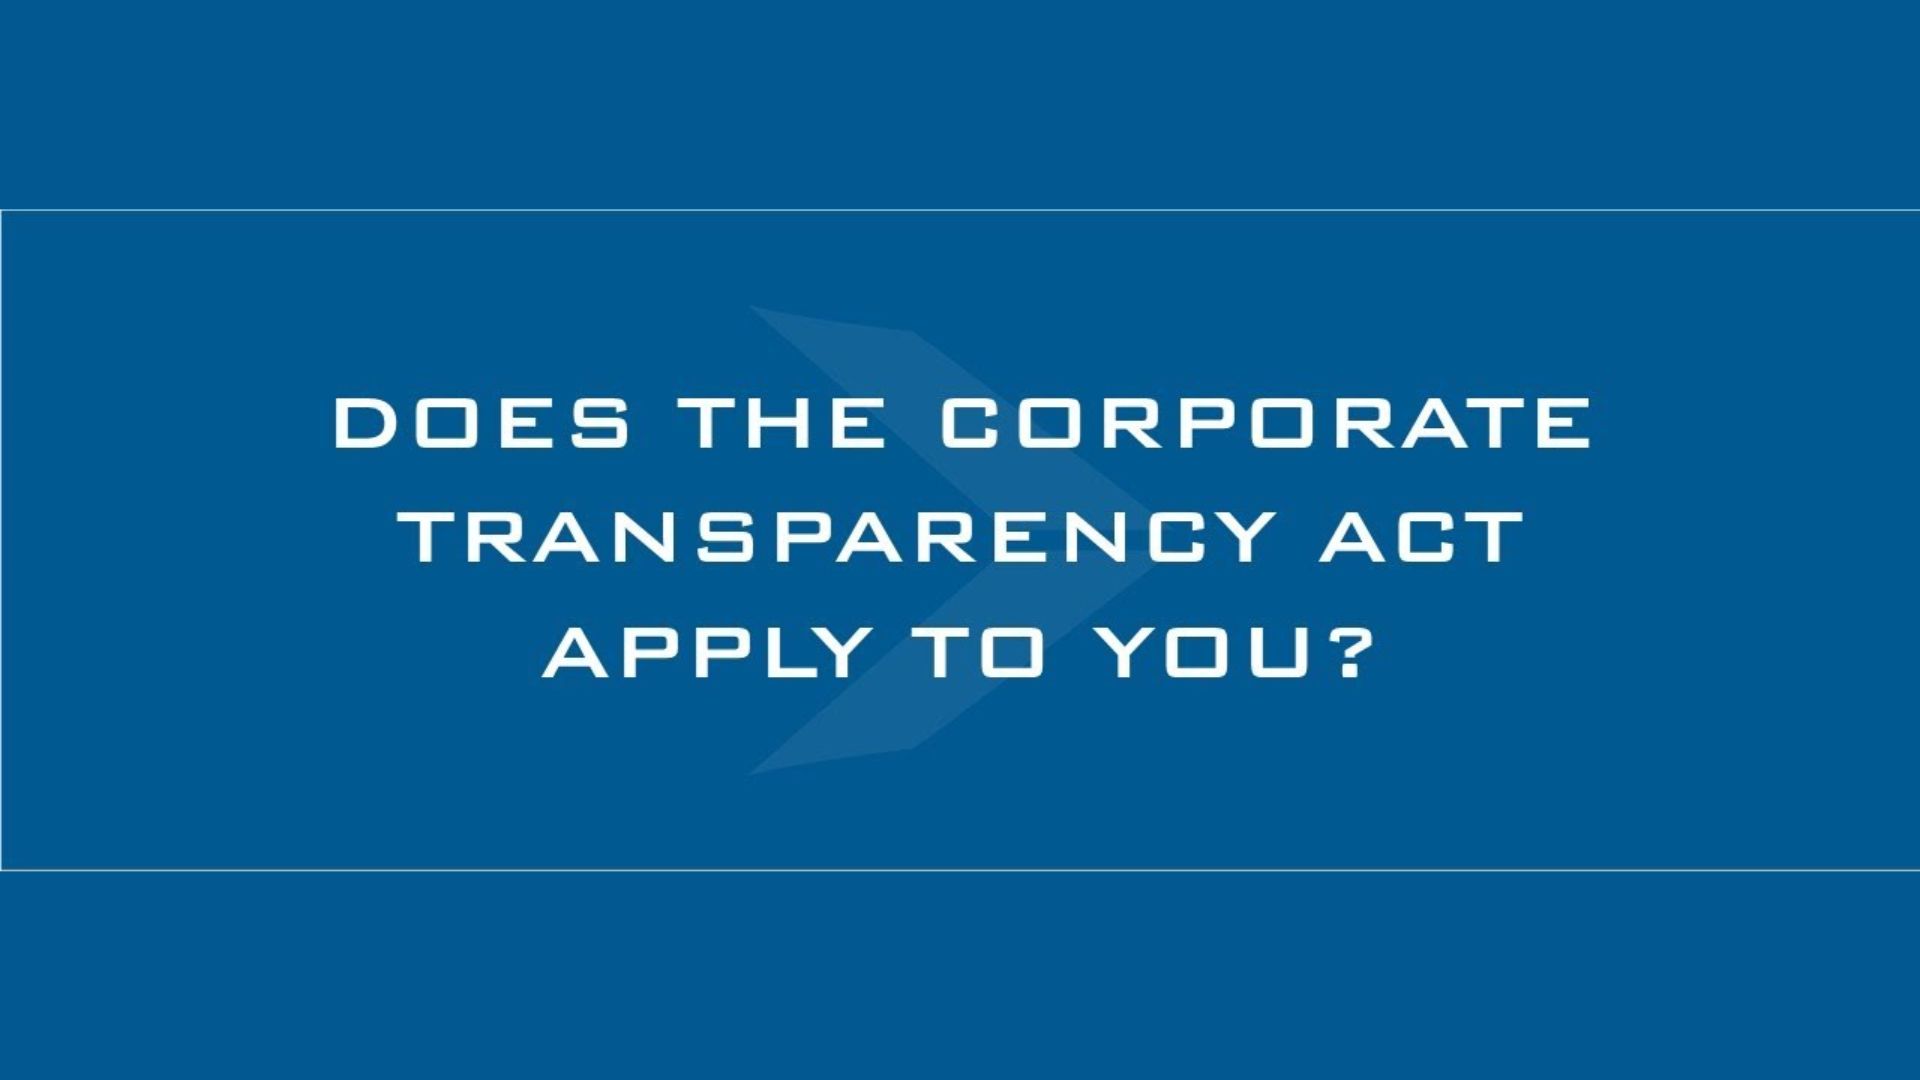 Who Does the Corporate Transparency Act Apply To?